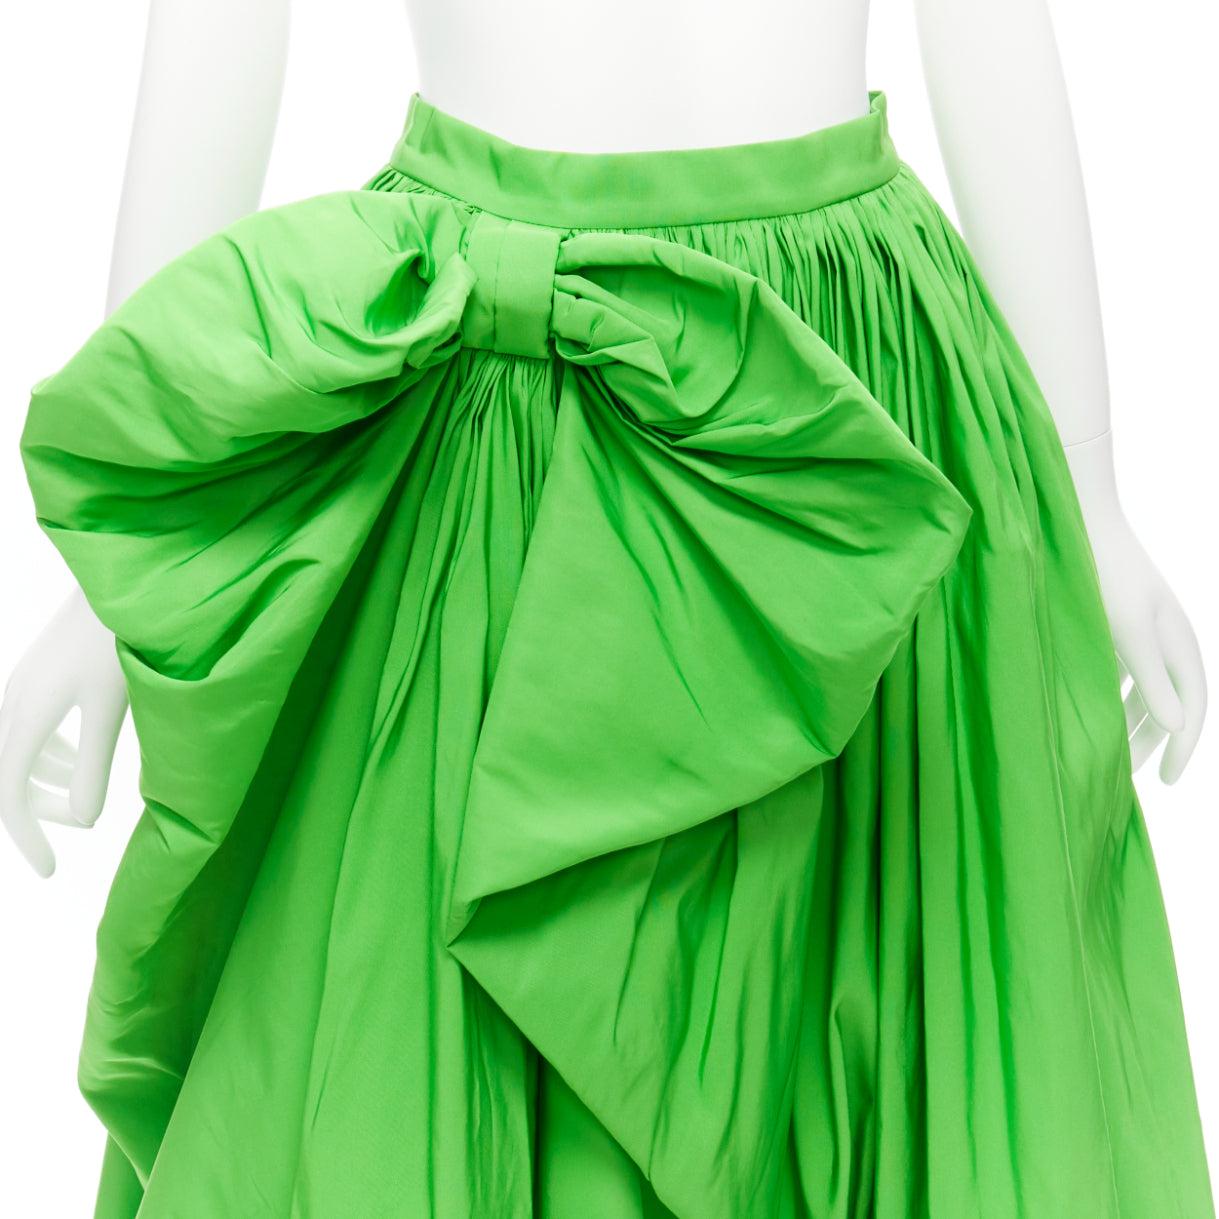 ALEXANDER MCQUEEN 2022 green taffeta bow detail high low cocktail skirt IT38 XS
Reference: AAWC/A00544
Brand: Alexander McQueen
Designer: Sarah Burton
Collection: 2022
Material: Polyester
Color: Green
Pattern: Solid
Closure: Zip
Lining: Green